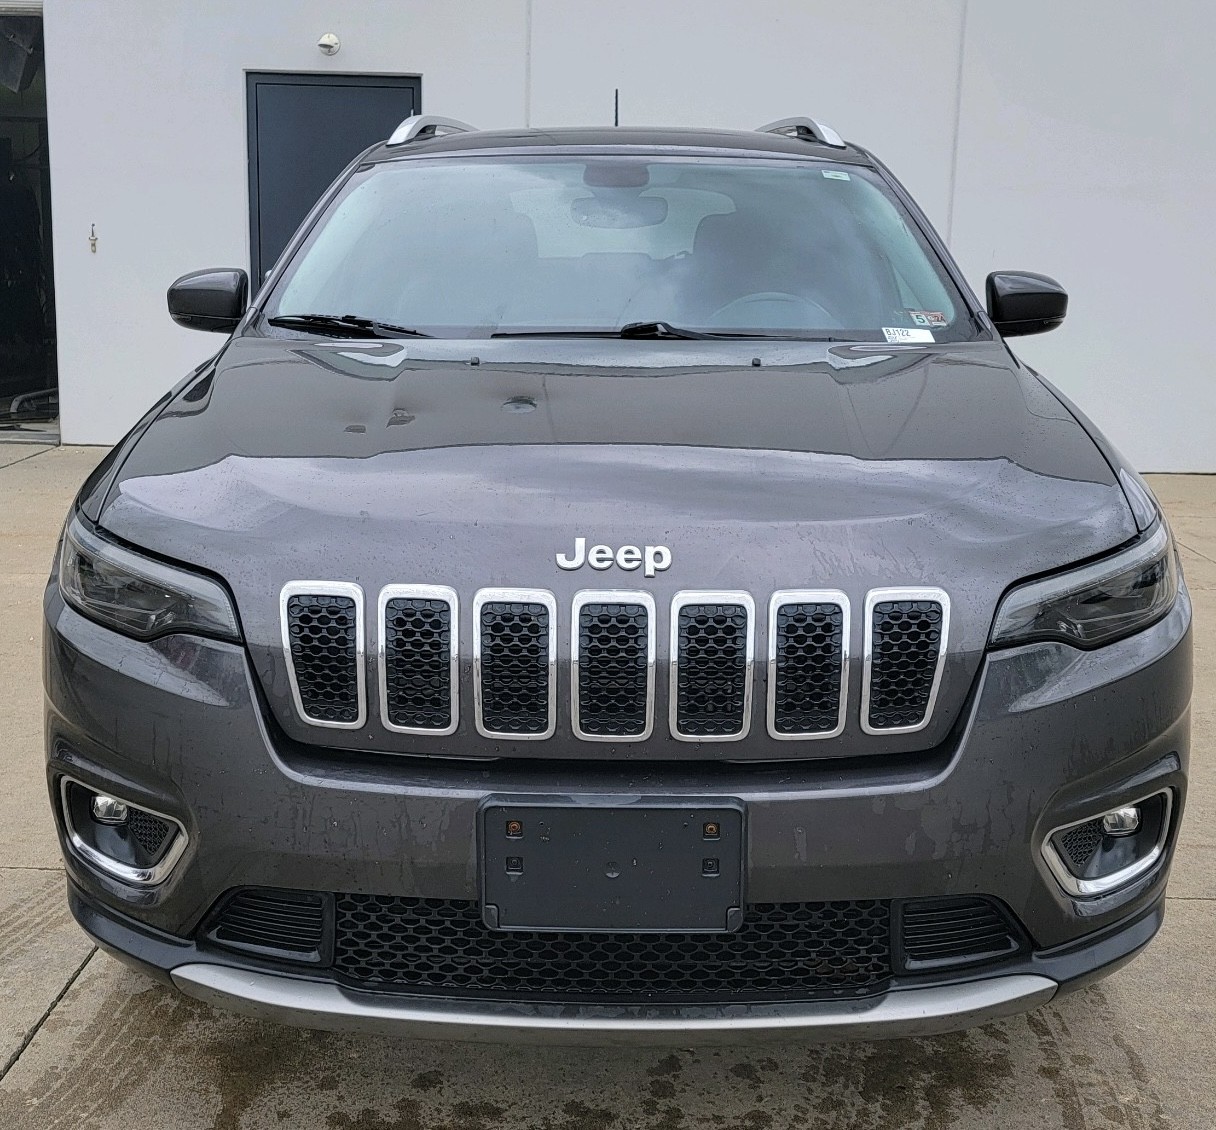 Used 2019 Jeep Cherokee Limited with VIN 1C4PJMDX7KD460603 for sale in Iowa City, IA